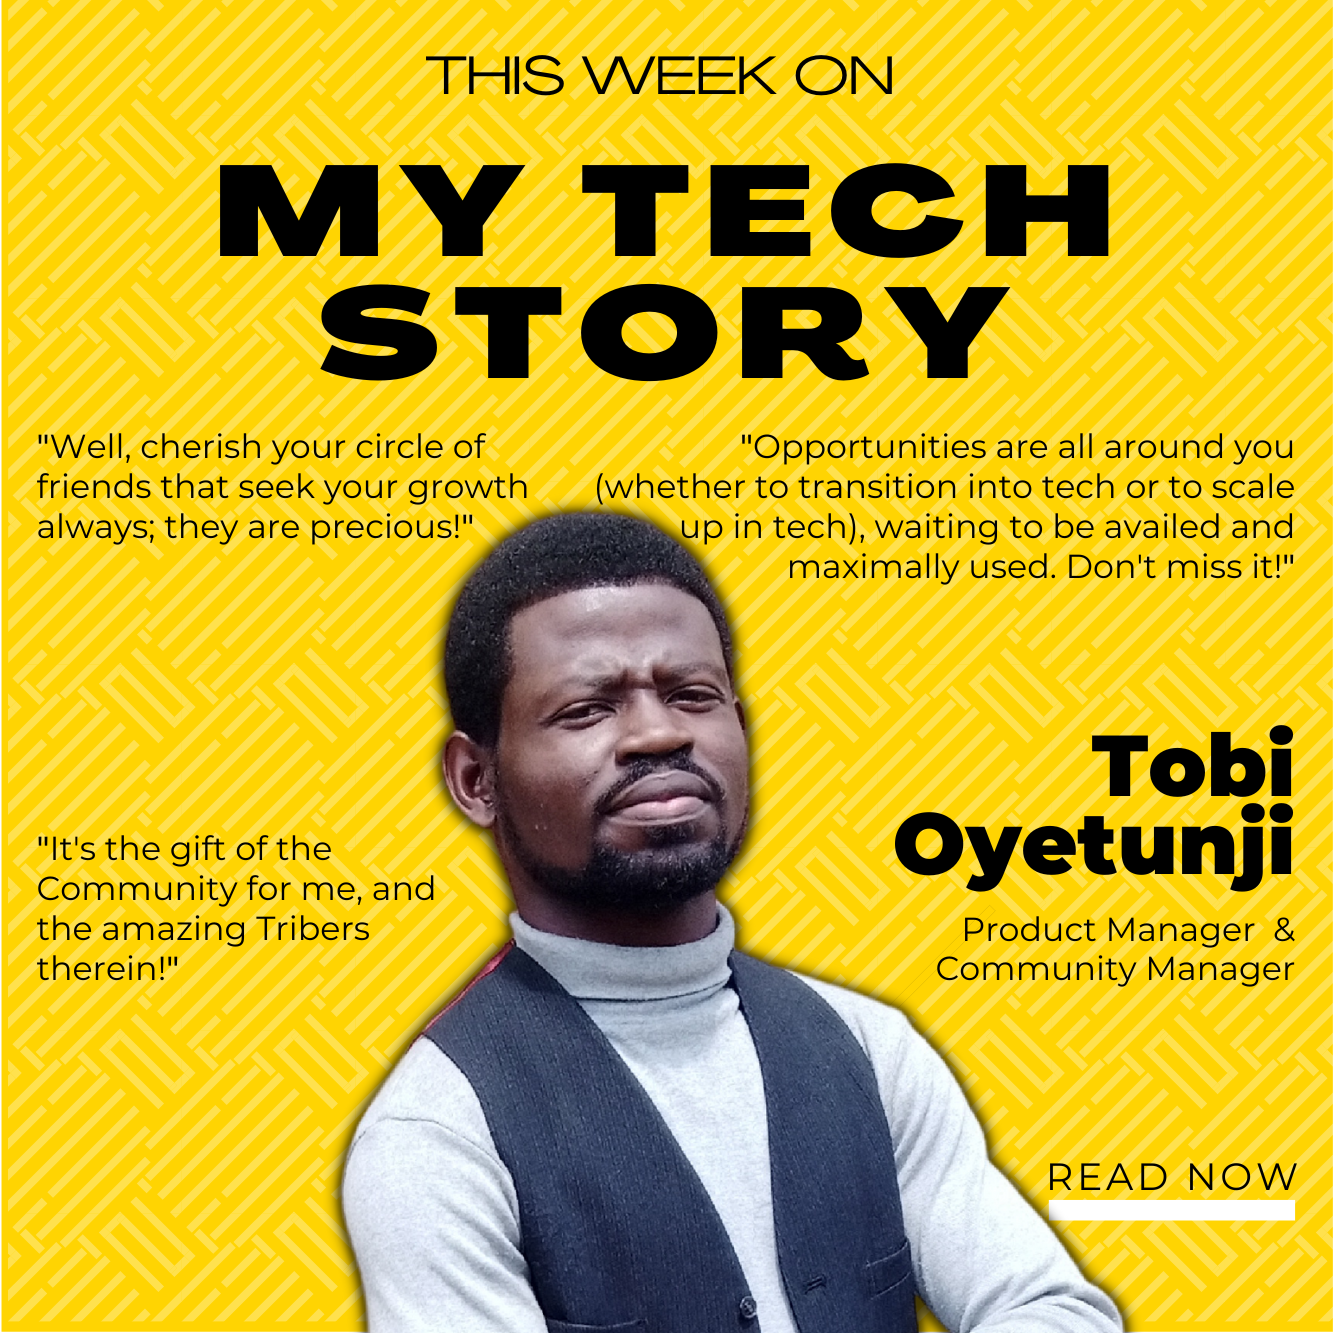 MyTechStory: Meet Tobi, A Product Manager, and Community Manager.